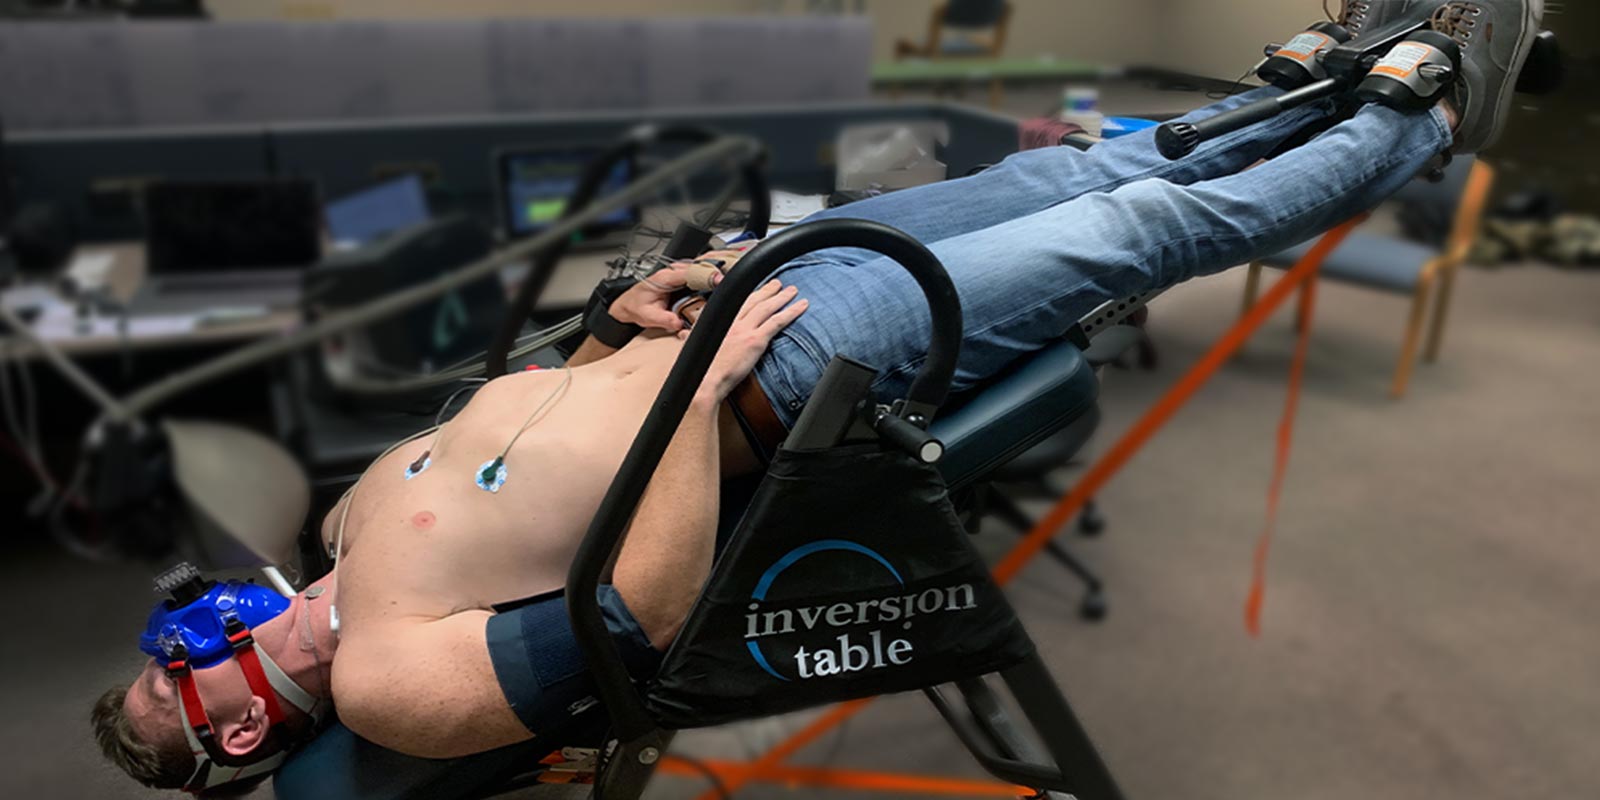 Male student strapped into an inversion table for study.